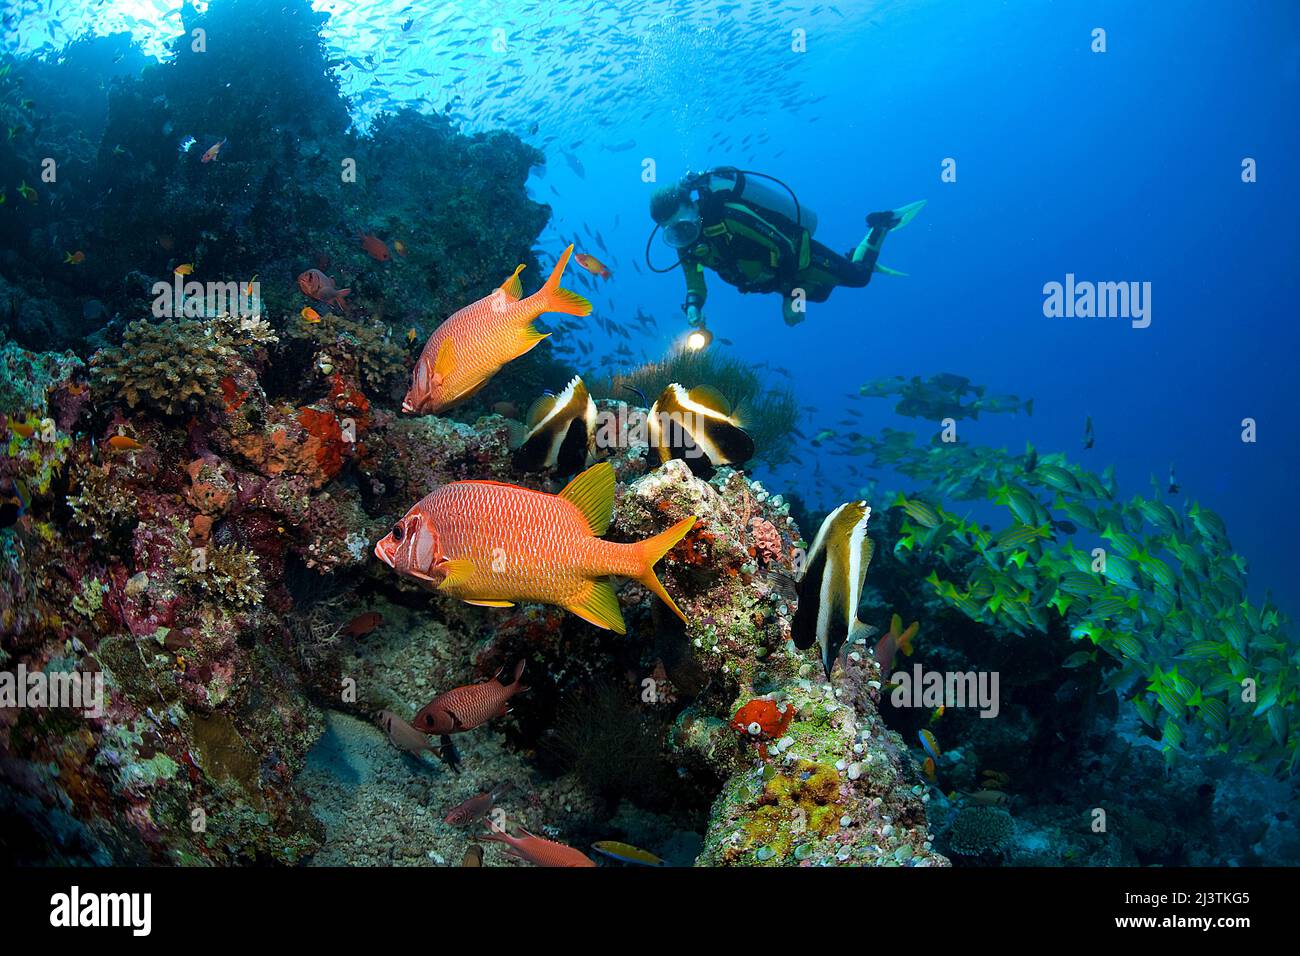 Scuba diver in a coral reef with Giant squirrelfish (Sargocentron spiniferum), Phantom bannerfishes (Heniochus pleurotaenia) and Bluestripe snappers Stock Photo